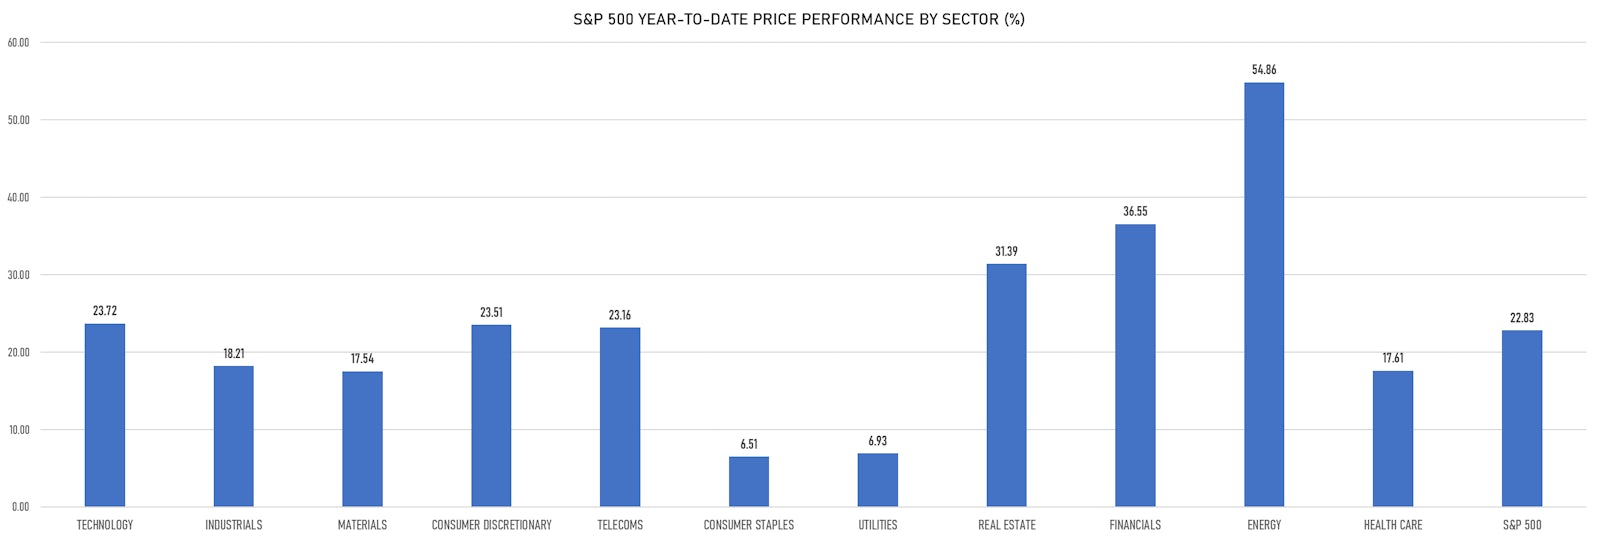 Year-To-Date Price Performance Of The S&P 500 Across Sectors | Sources: ϕpost, Refinitiv data